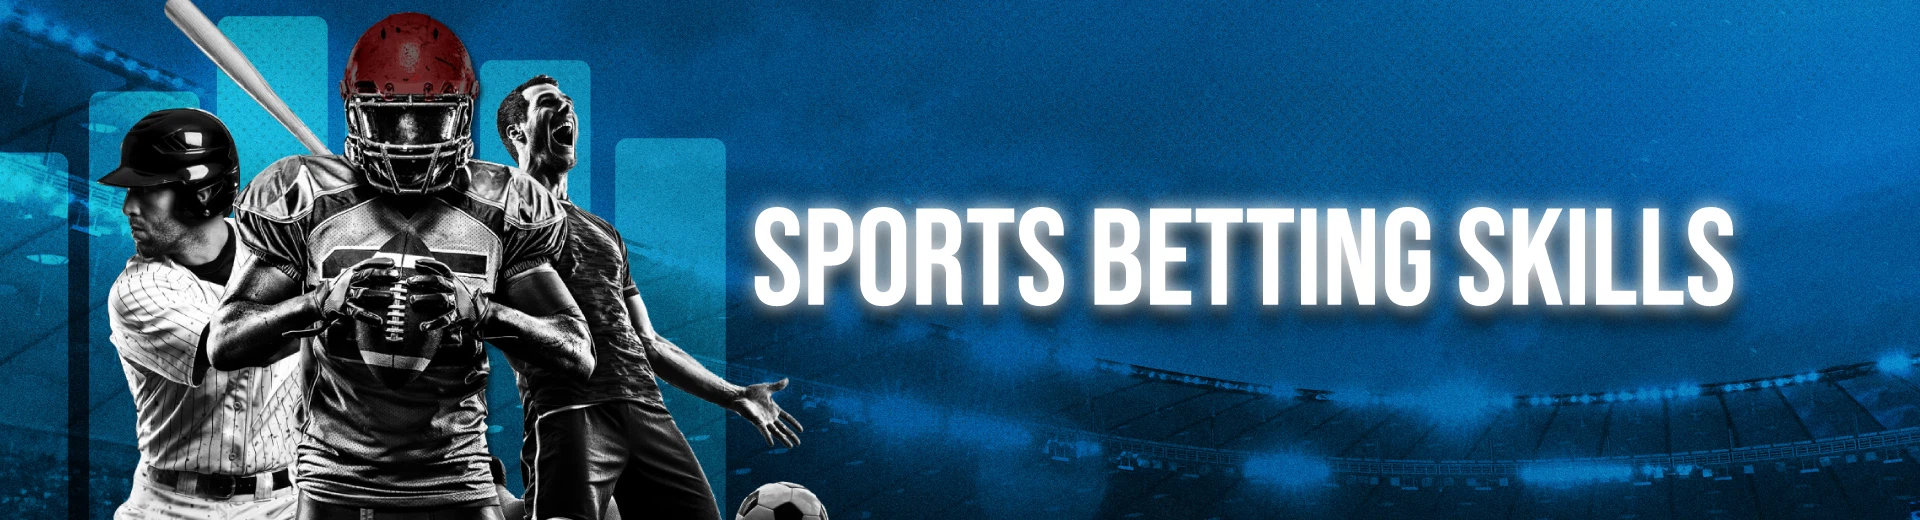 How to Improve Your Sports Betting Skills